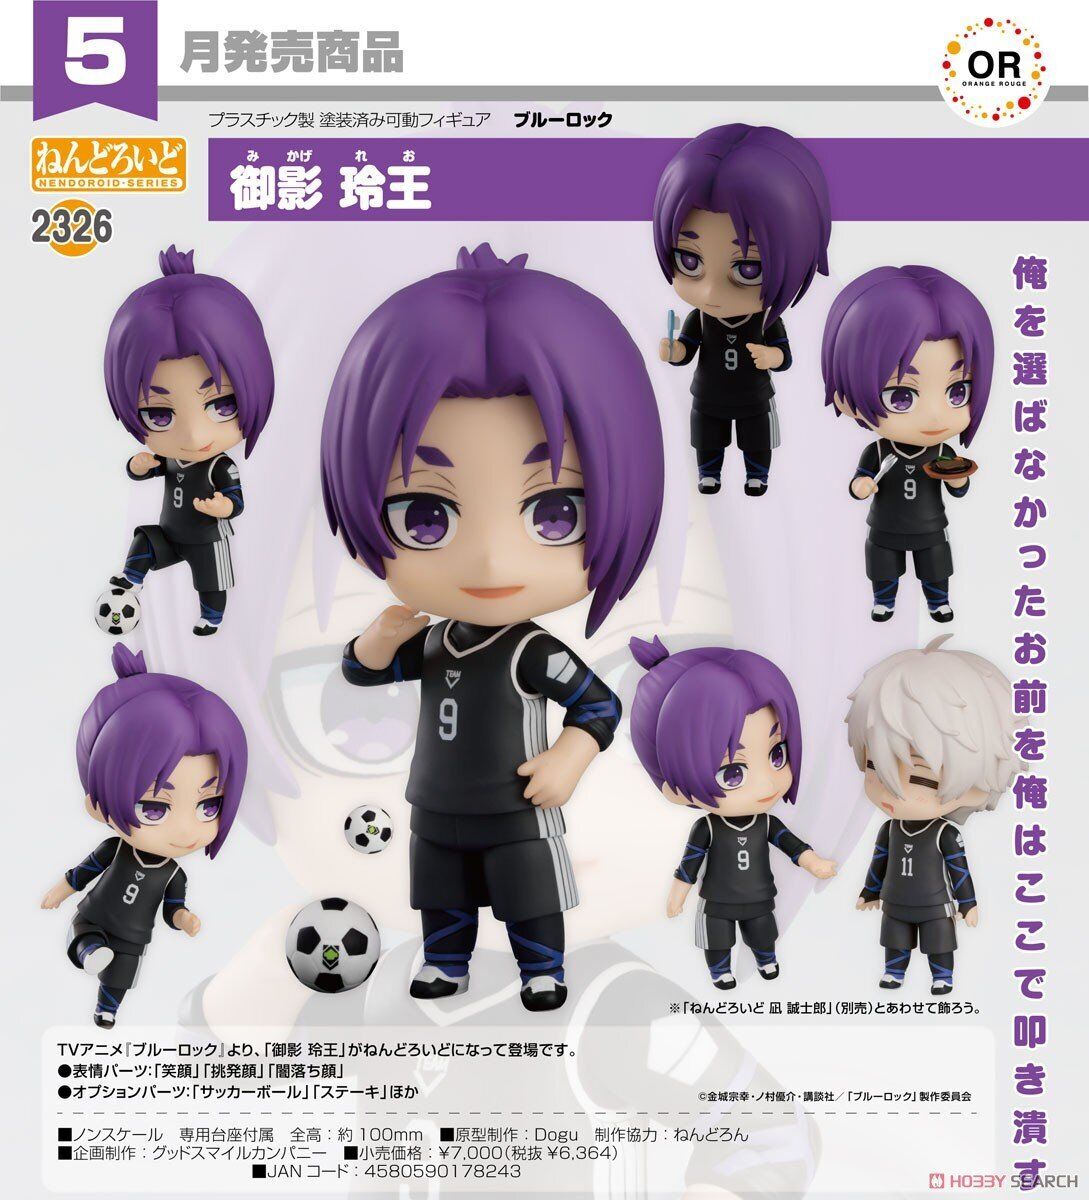 GSC NENDOROID BLUELOCK 2236 Mikage Reo Action Figure in stock